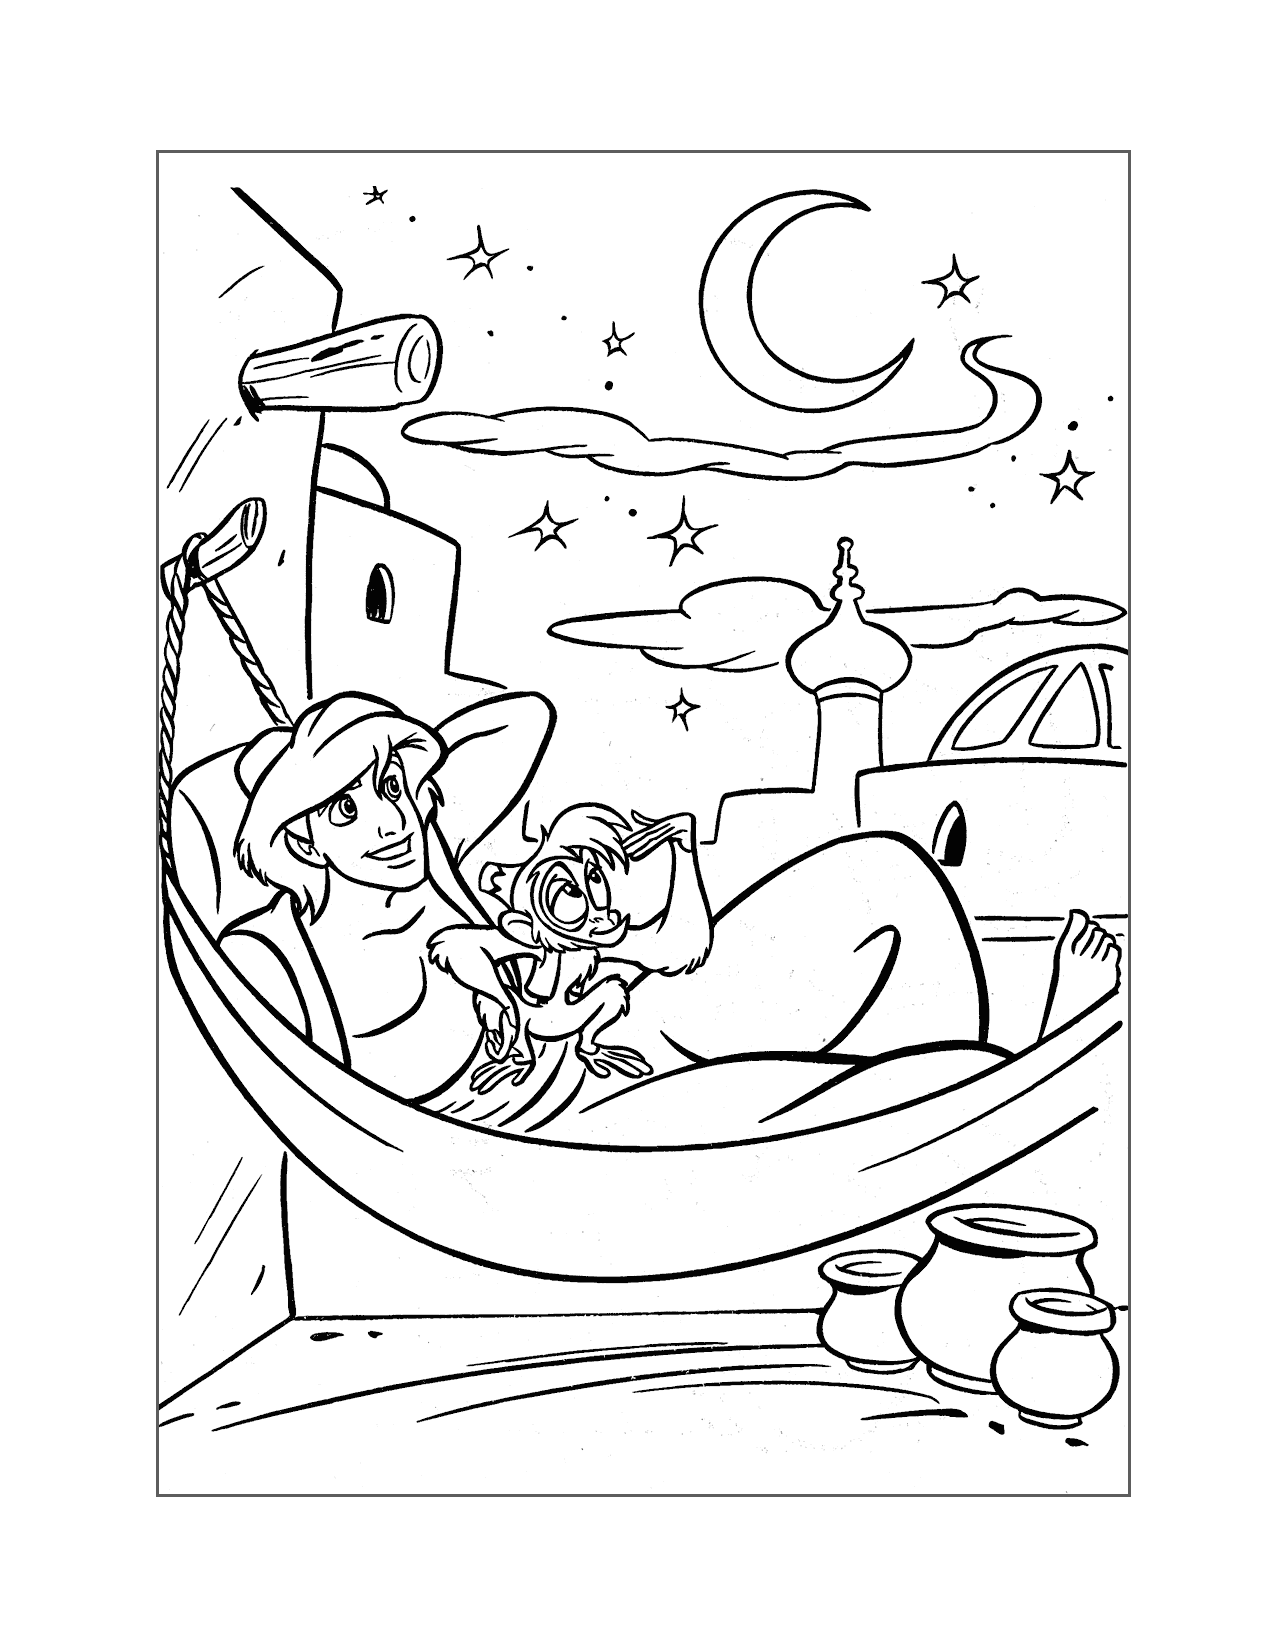 Aladdin Dreams Of A New Life Coloring Page